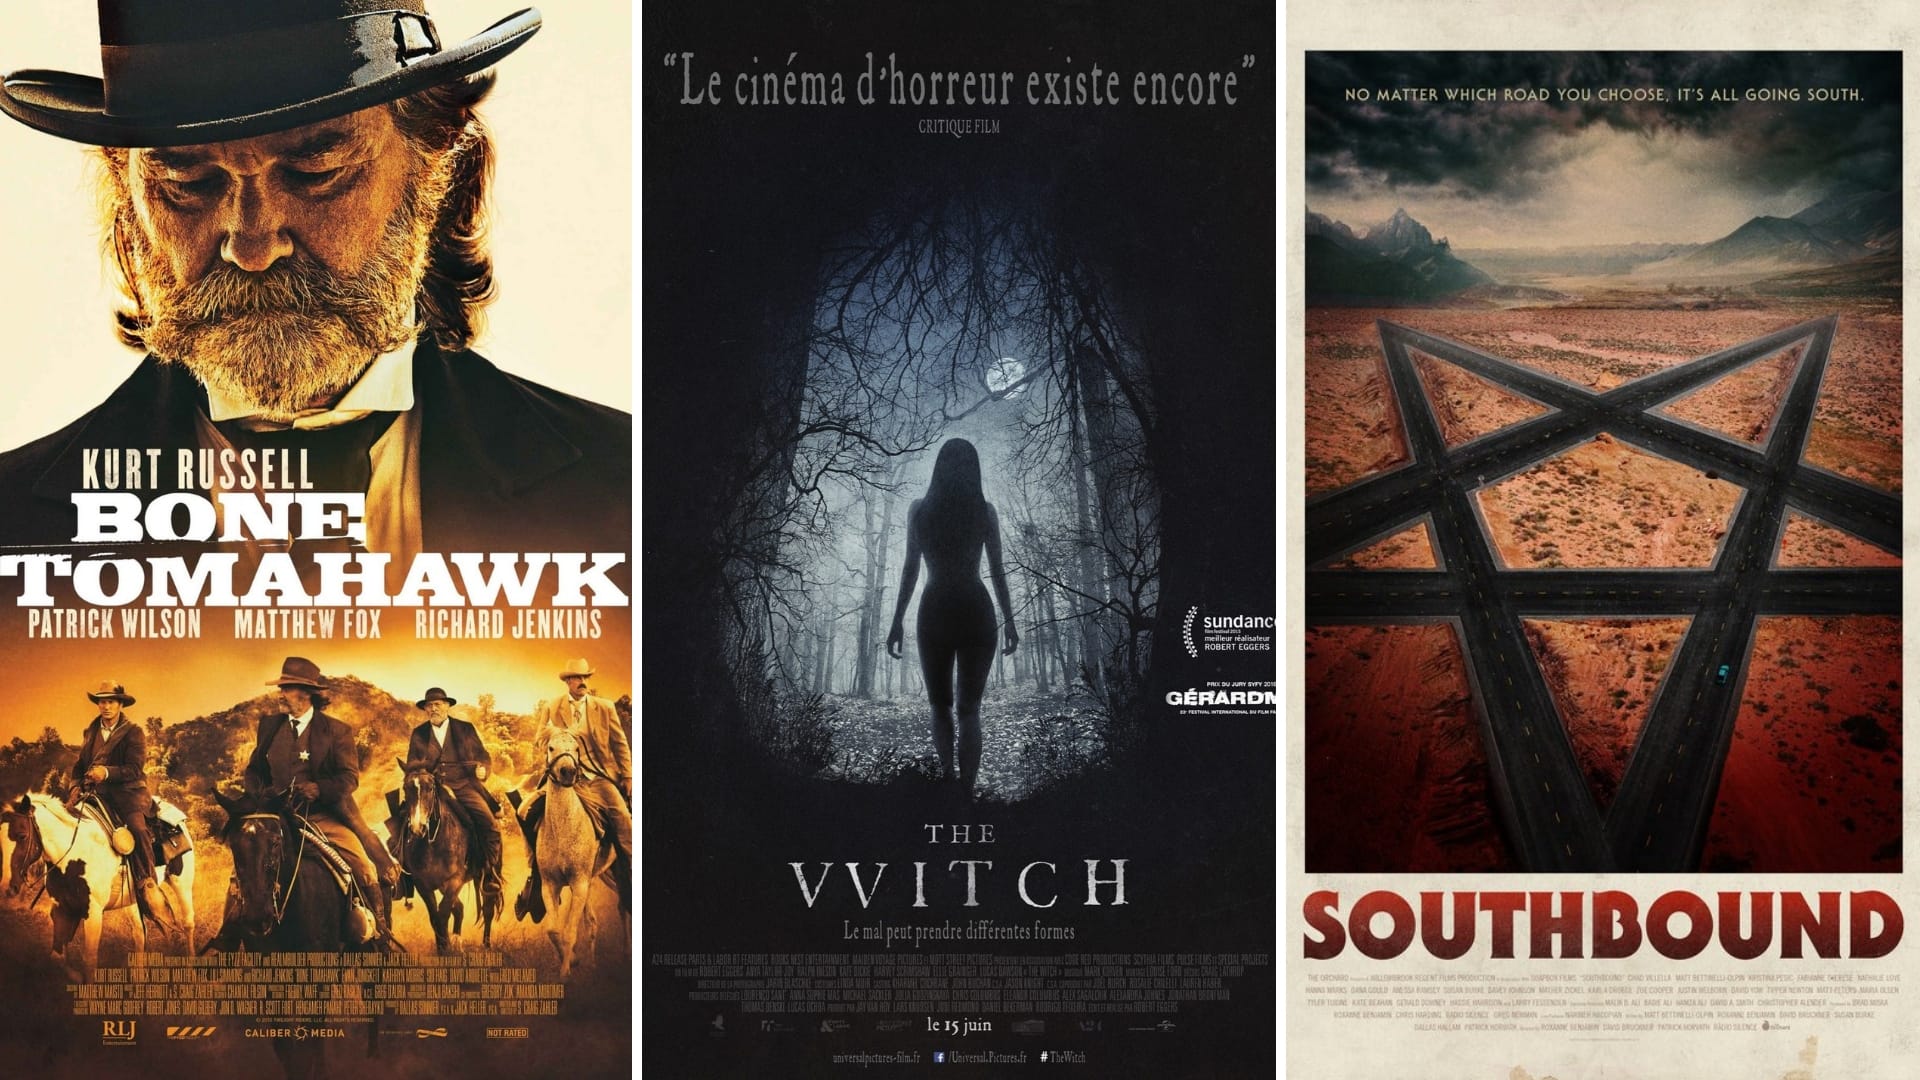 Bone Tomahawk - The Witch - Southbound affiches cinéma films